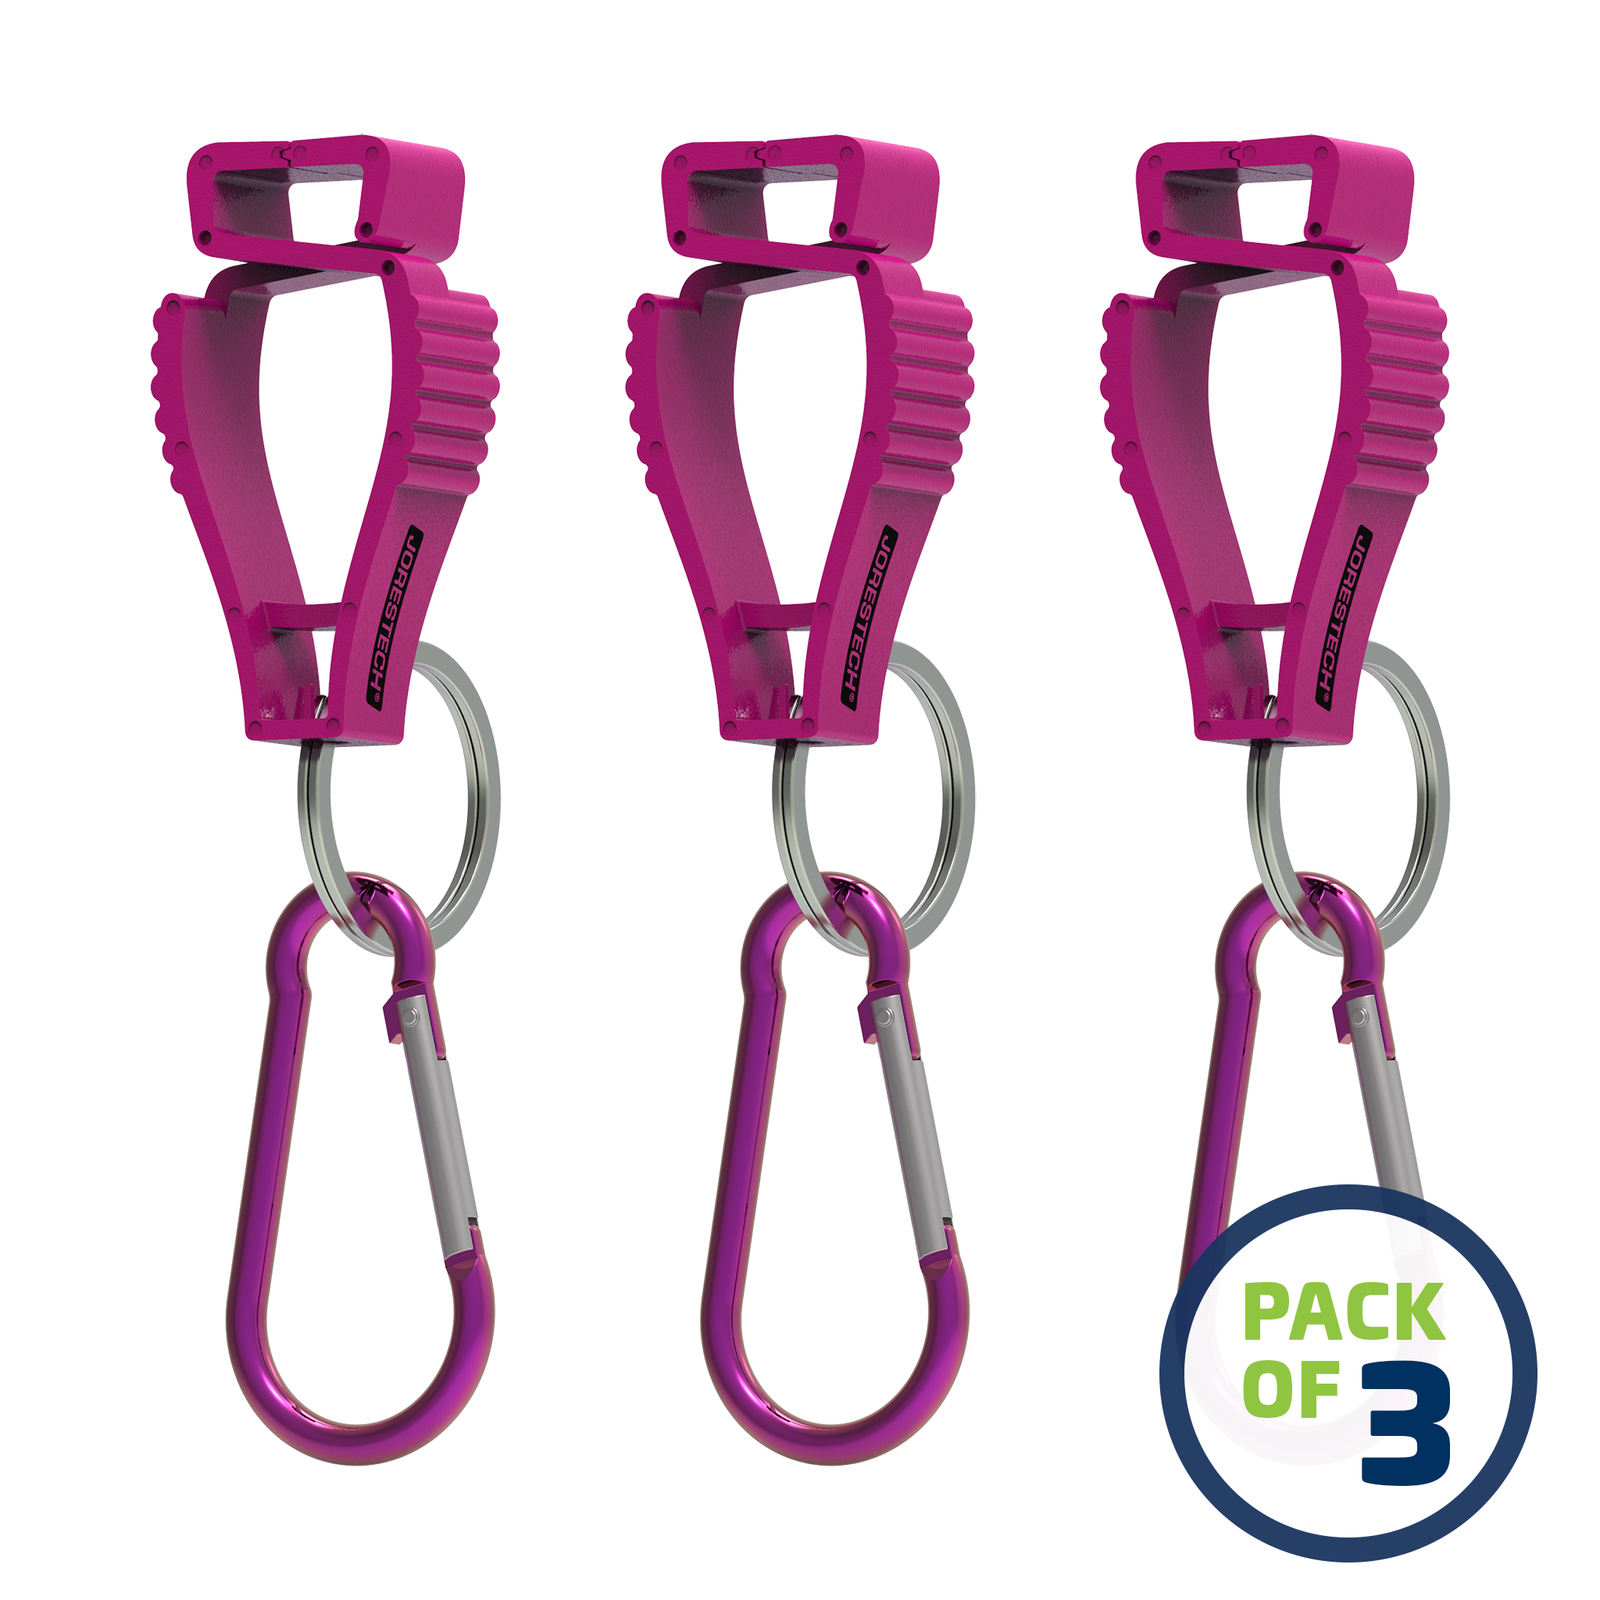 Pack of 3 Pink JORESTECH glove clip safety holders with carabiner 